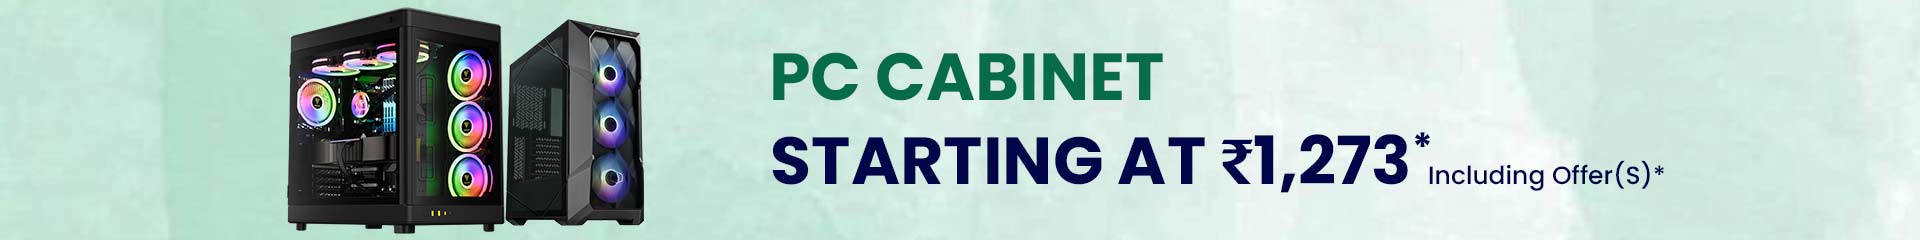 Cabinet starting at rs 1273 category banner